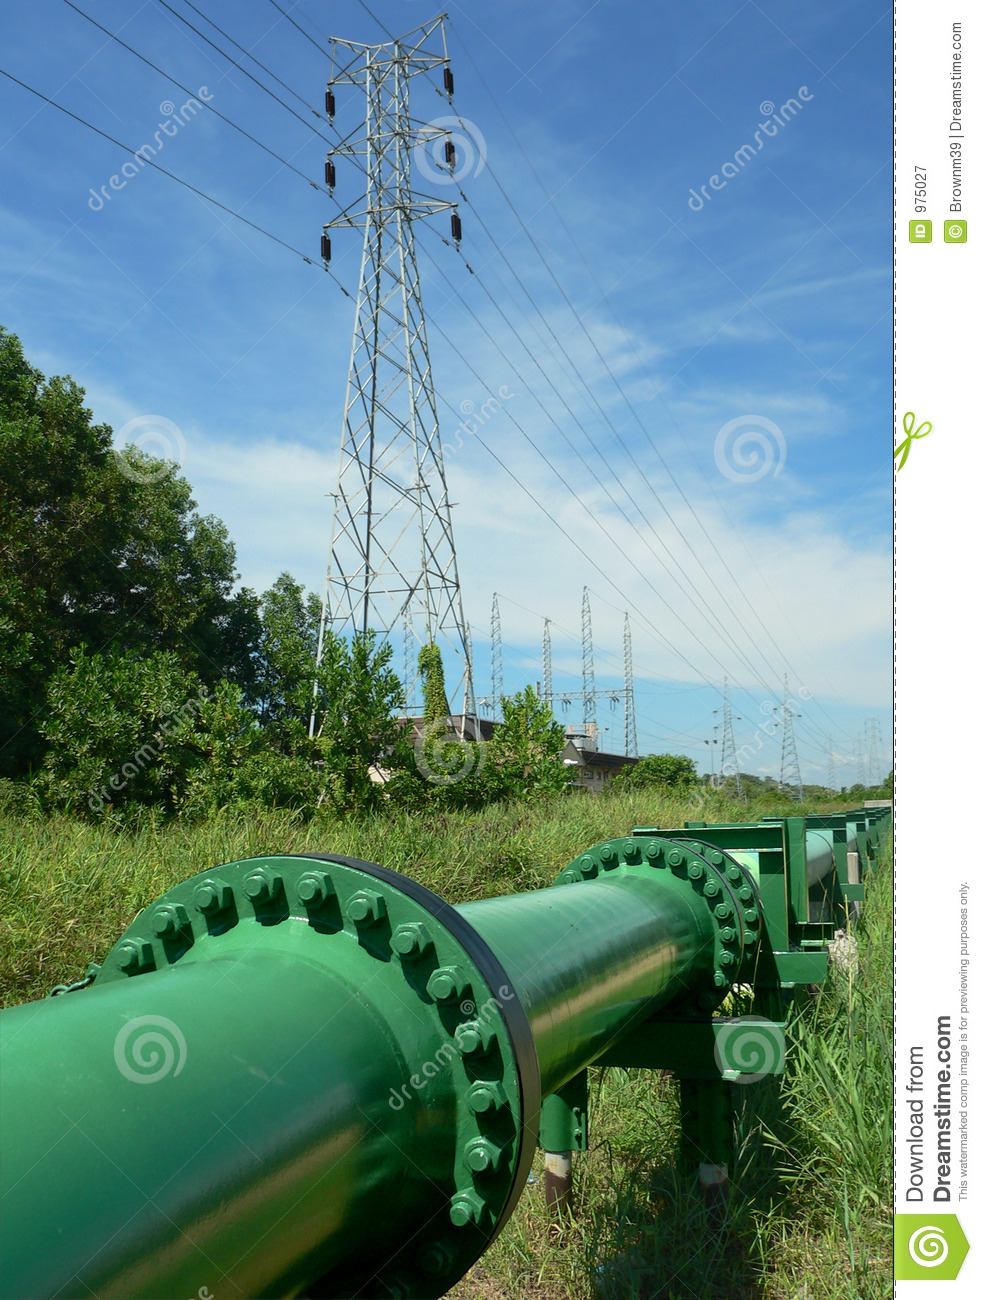 Brunei  Crude Oil Pipe Royalty Free Stock Photography   Image  975027